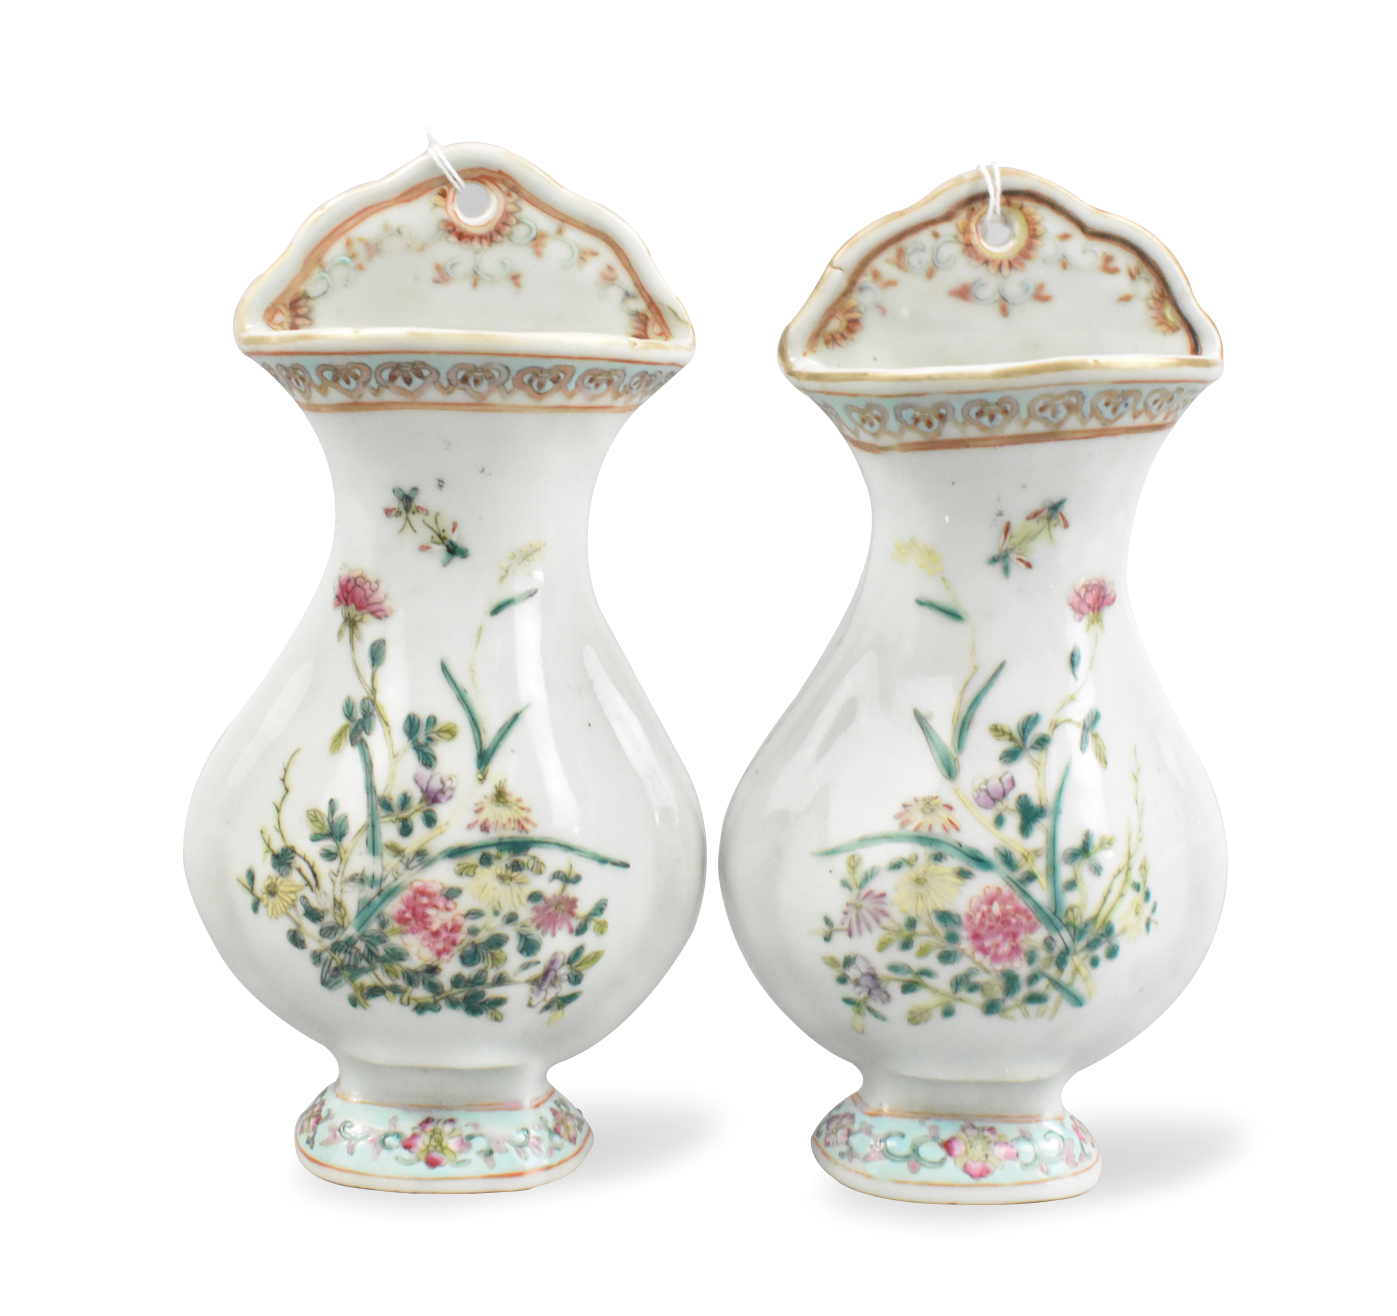 PAIR OF CHINESE FAMILLE ROSE WALL